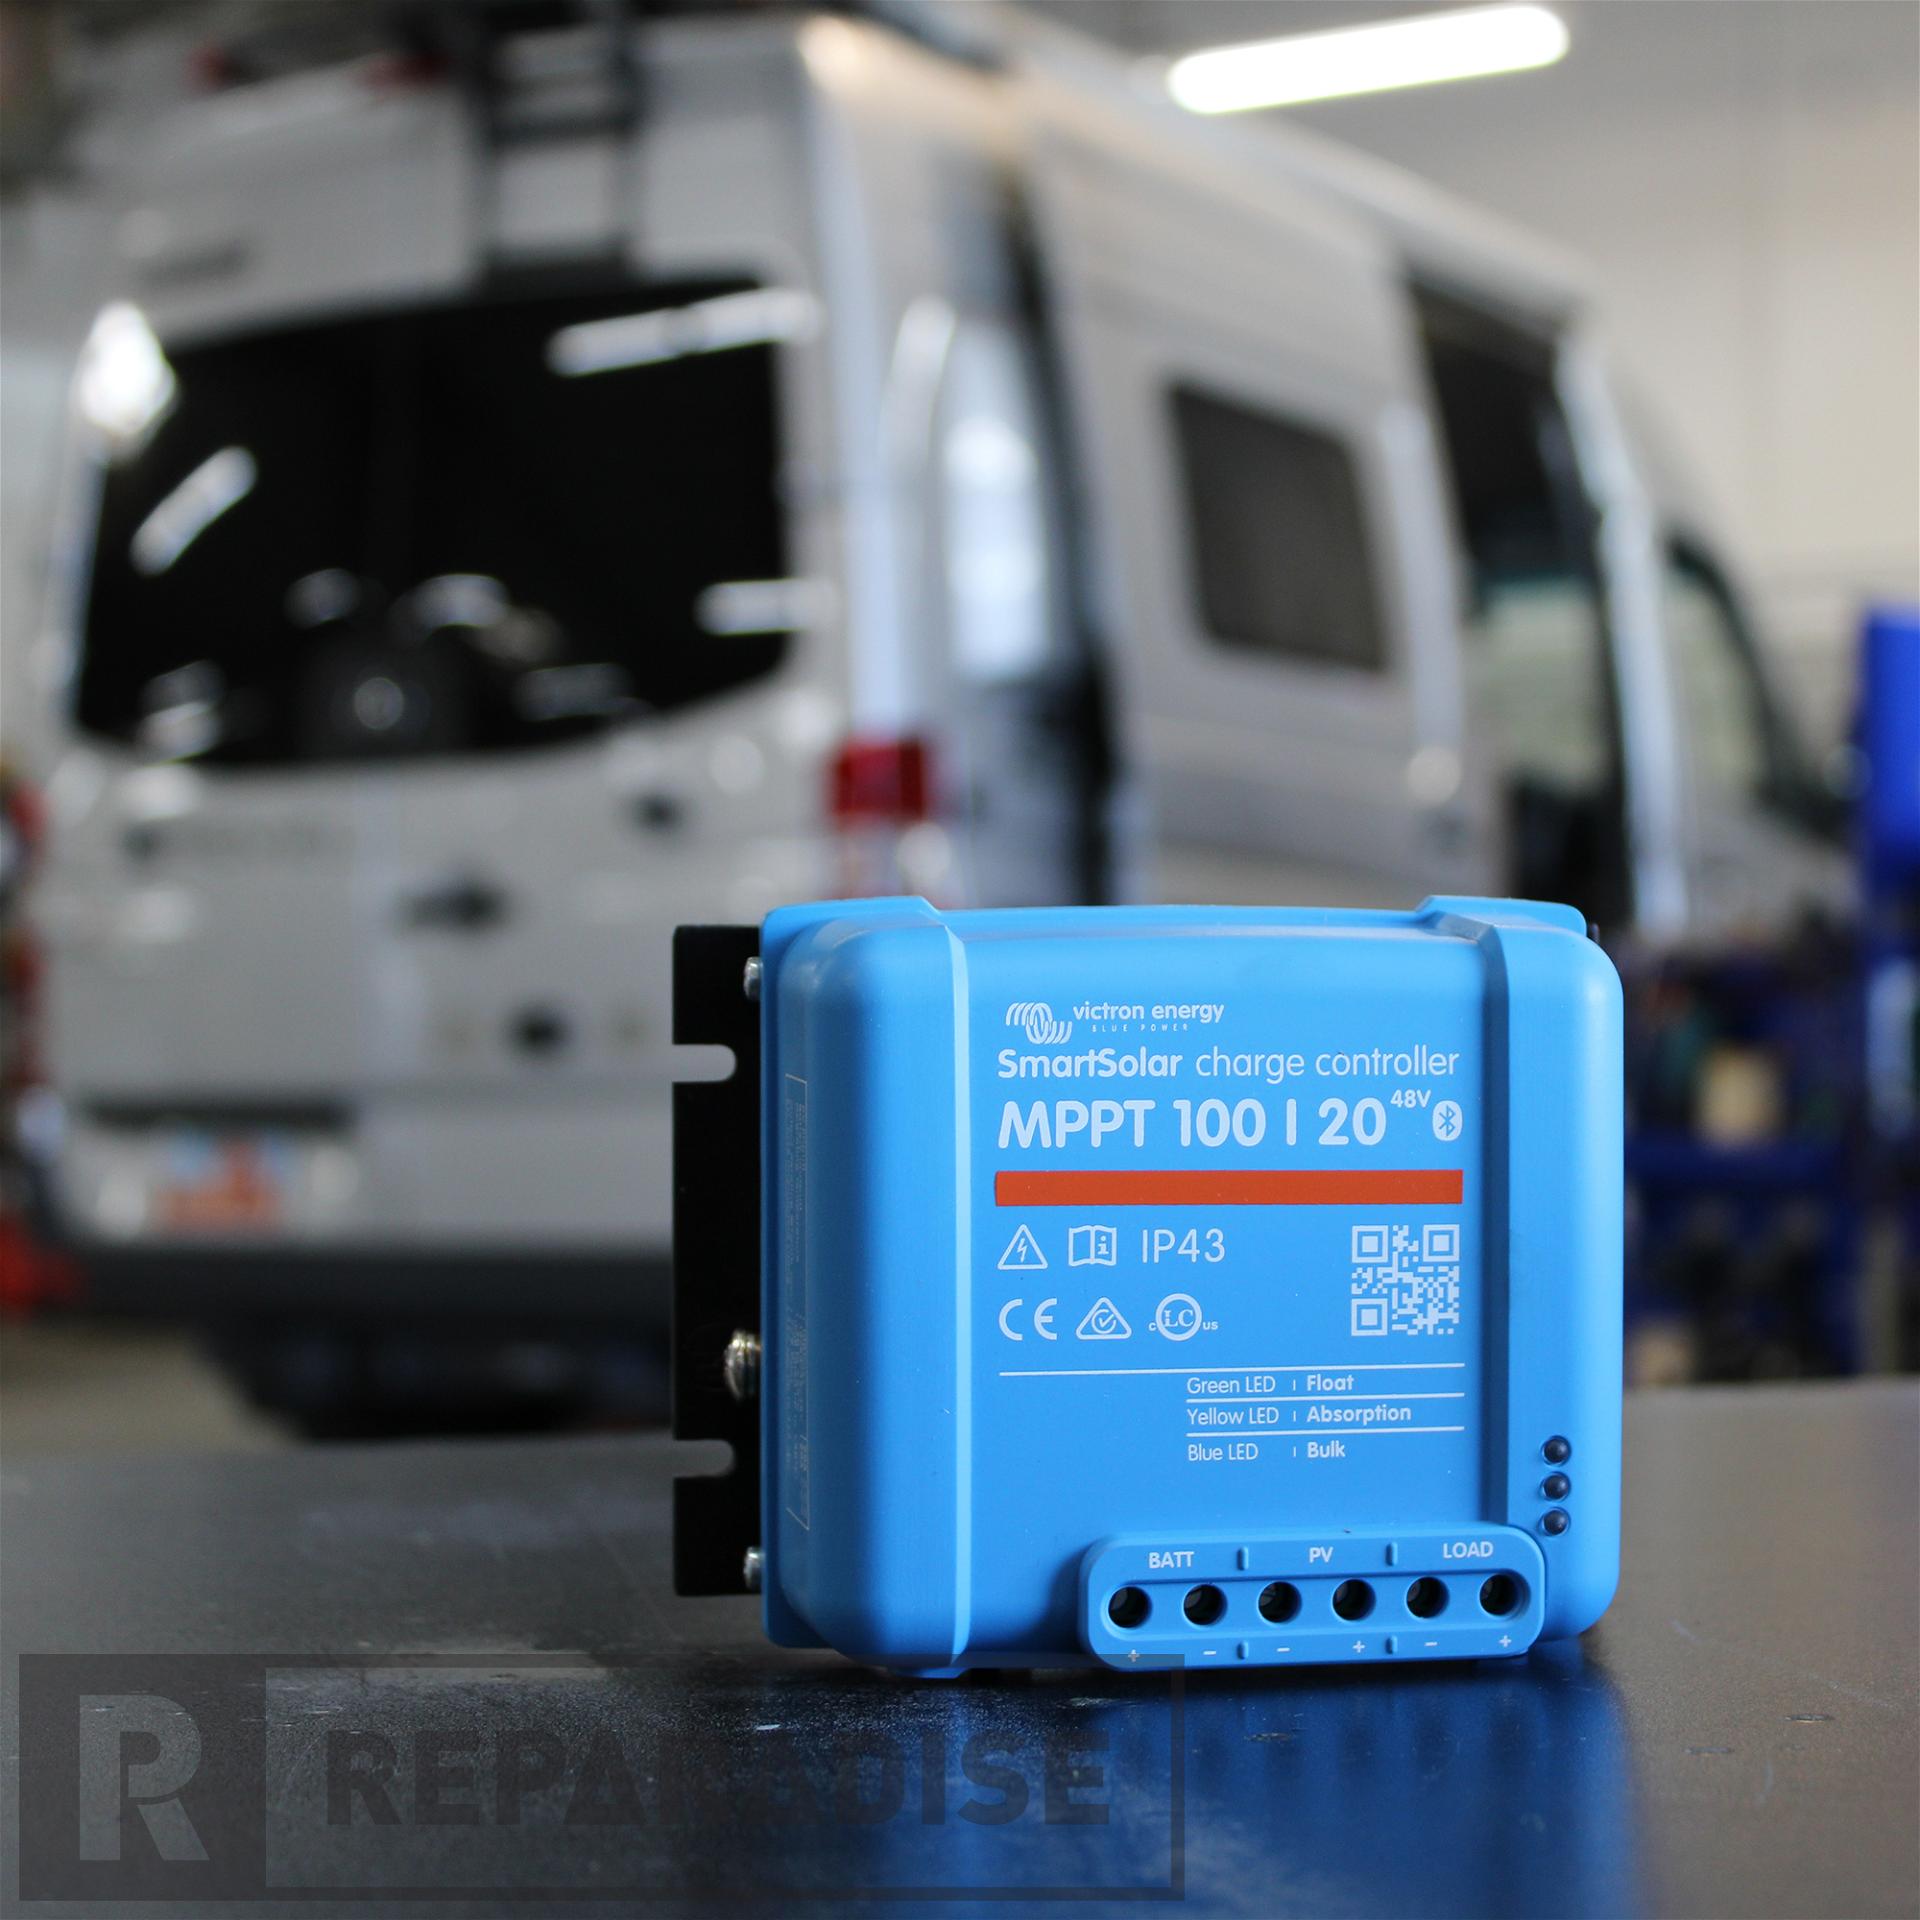 Camper Trailer and RV products - Victron MPPT Solar Charge Controller -  Reparadise